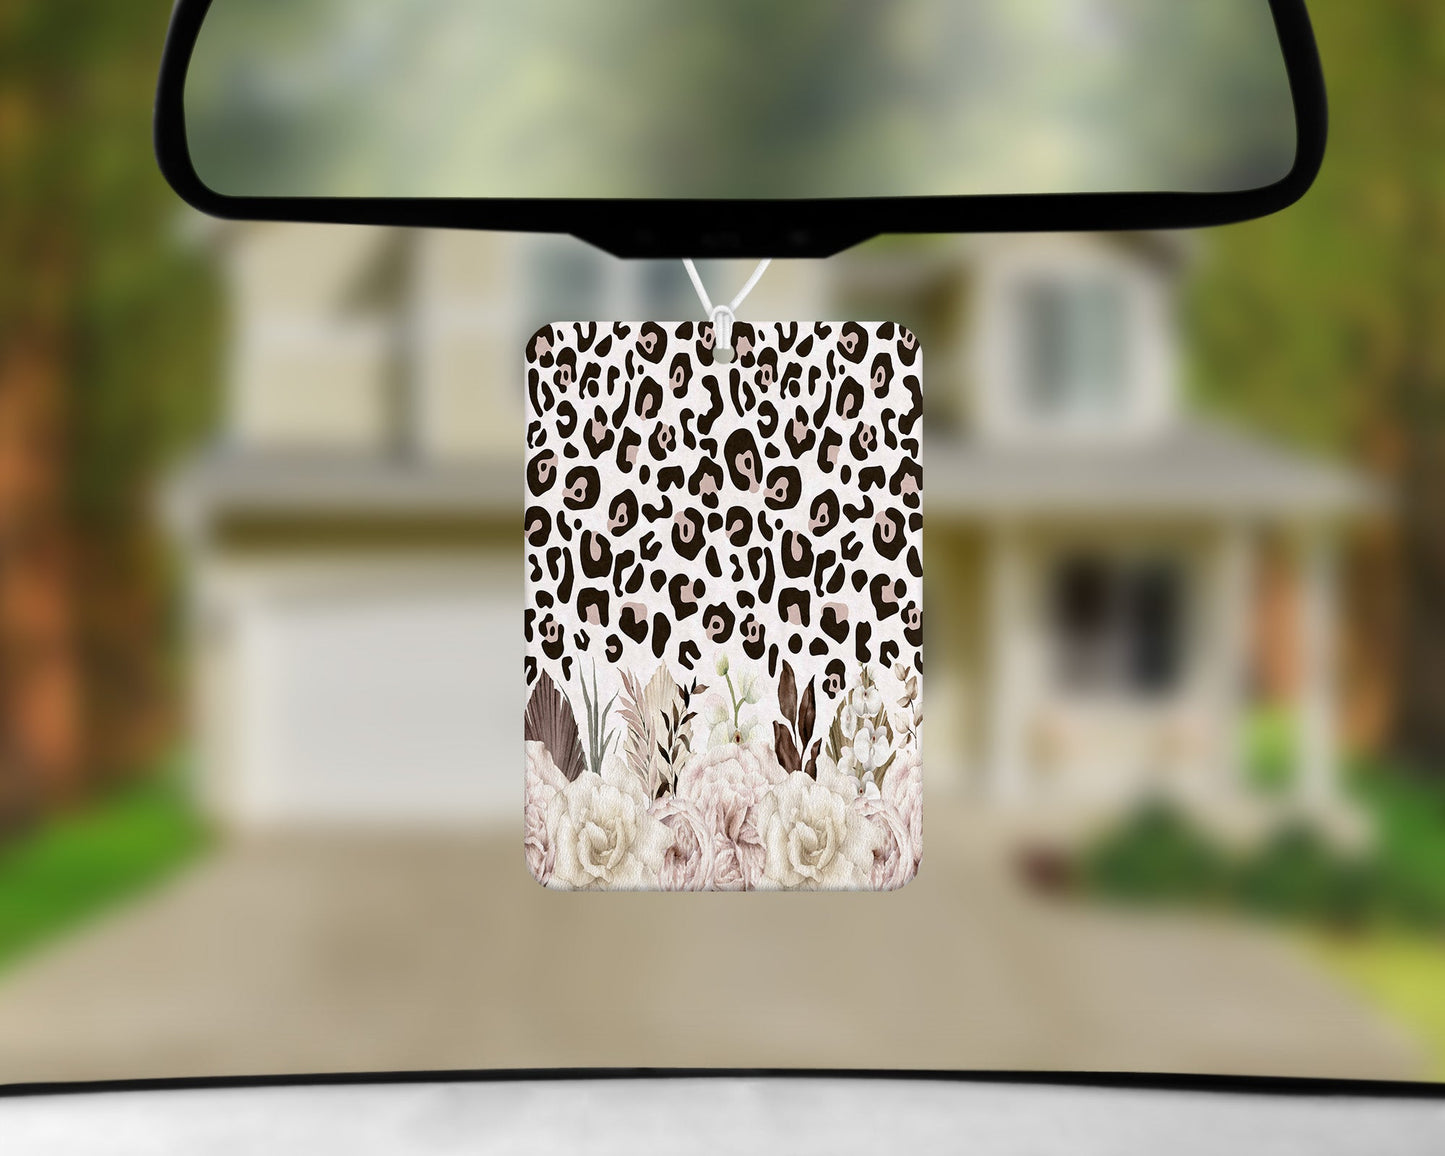 Leopard Print Flowers|Freshie|Includes Scent Bottle - Vehicle Air Freshener